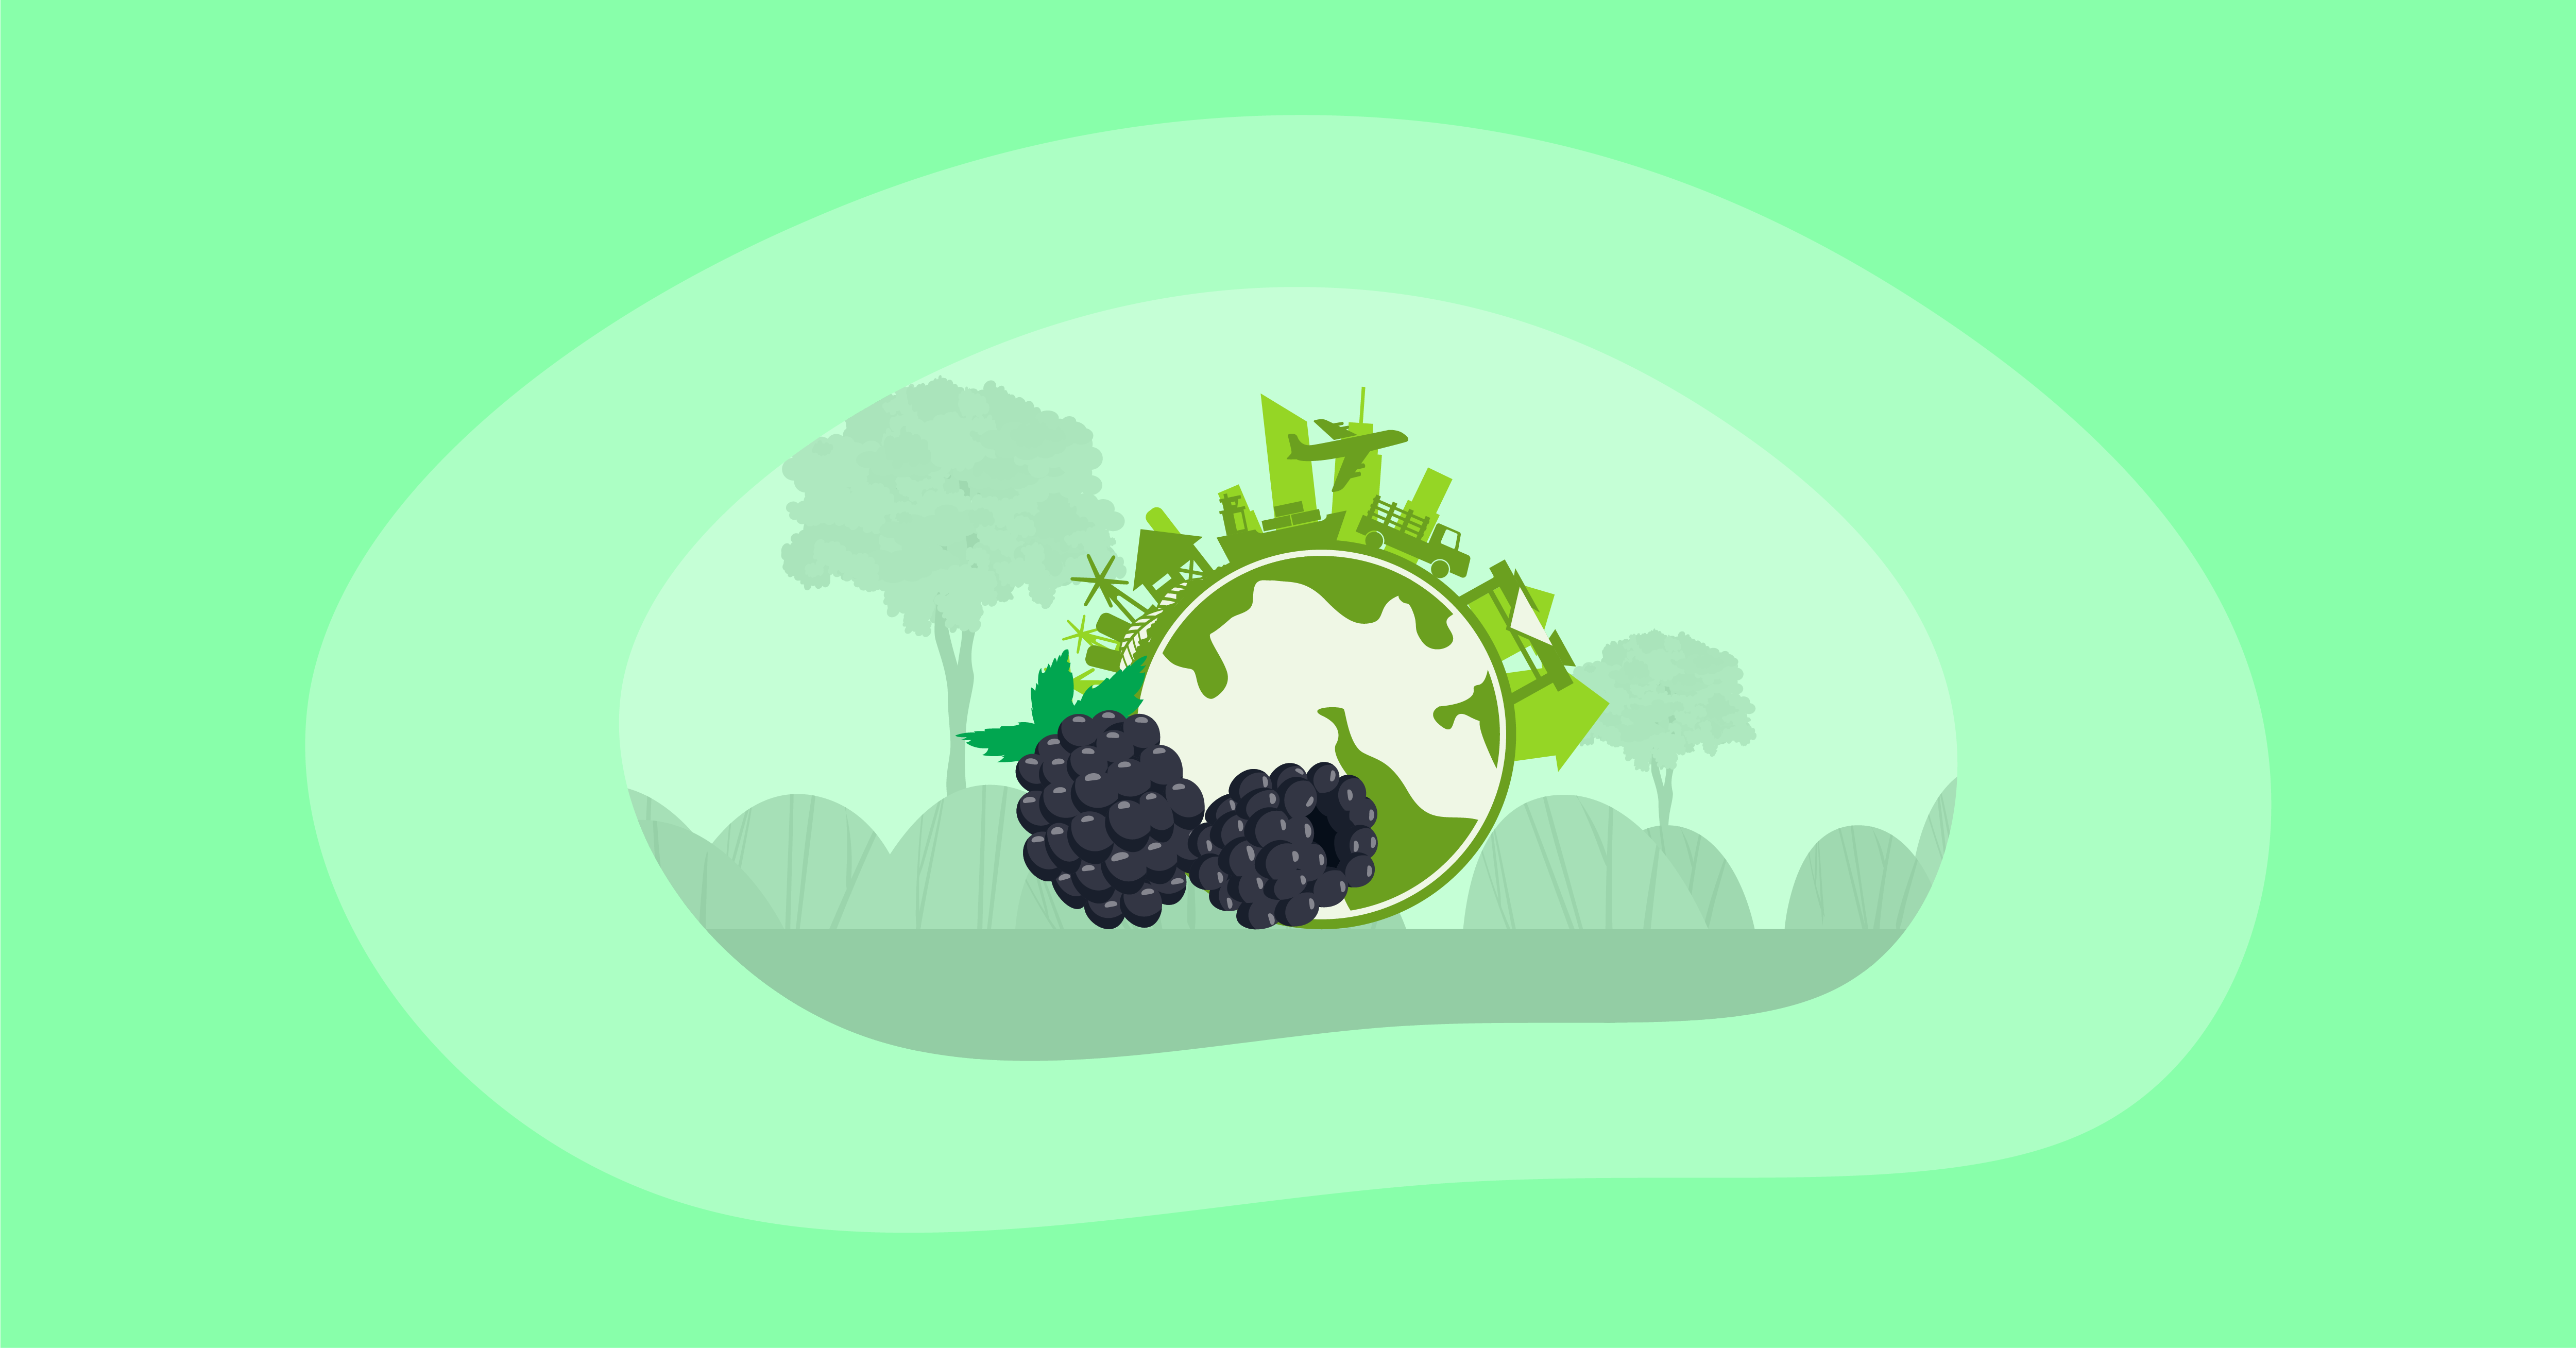 Illustration of blackberries and their environmental impact